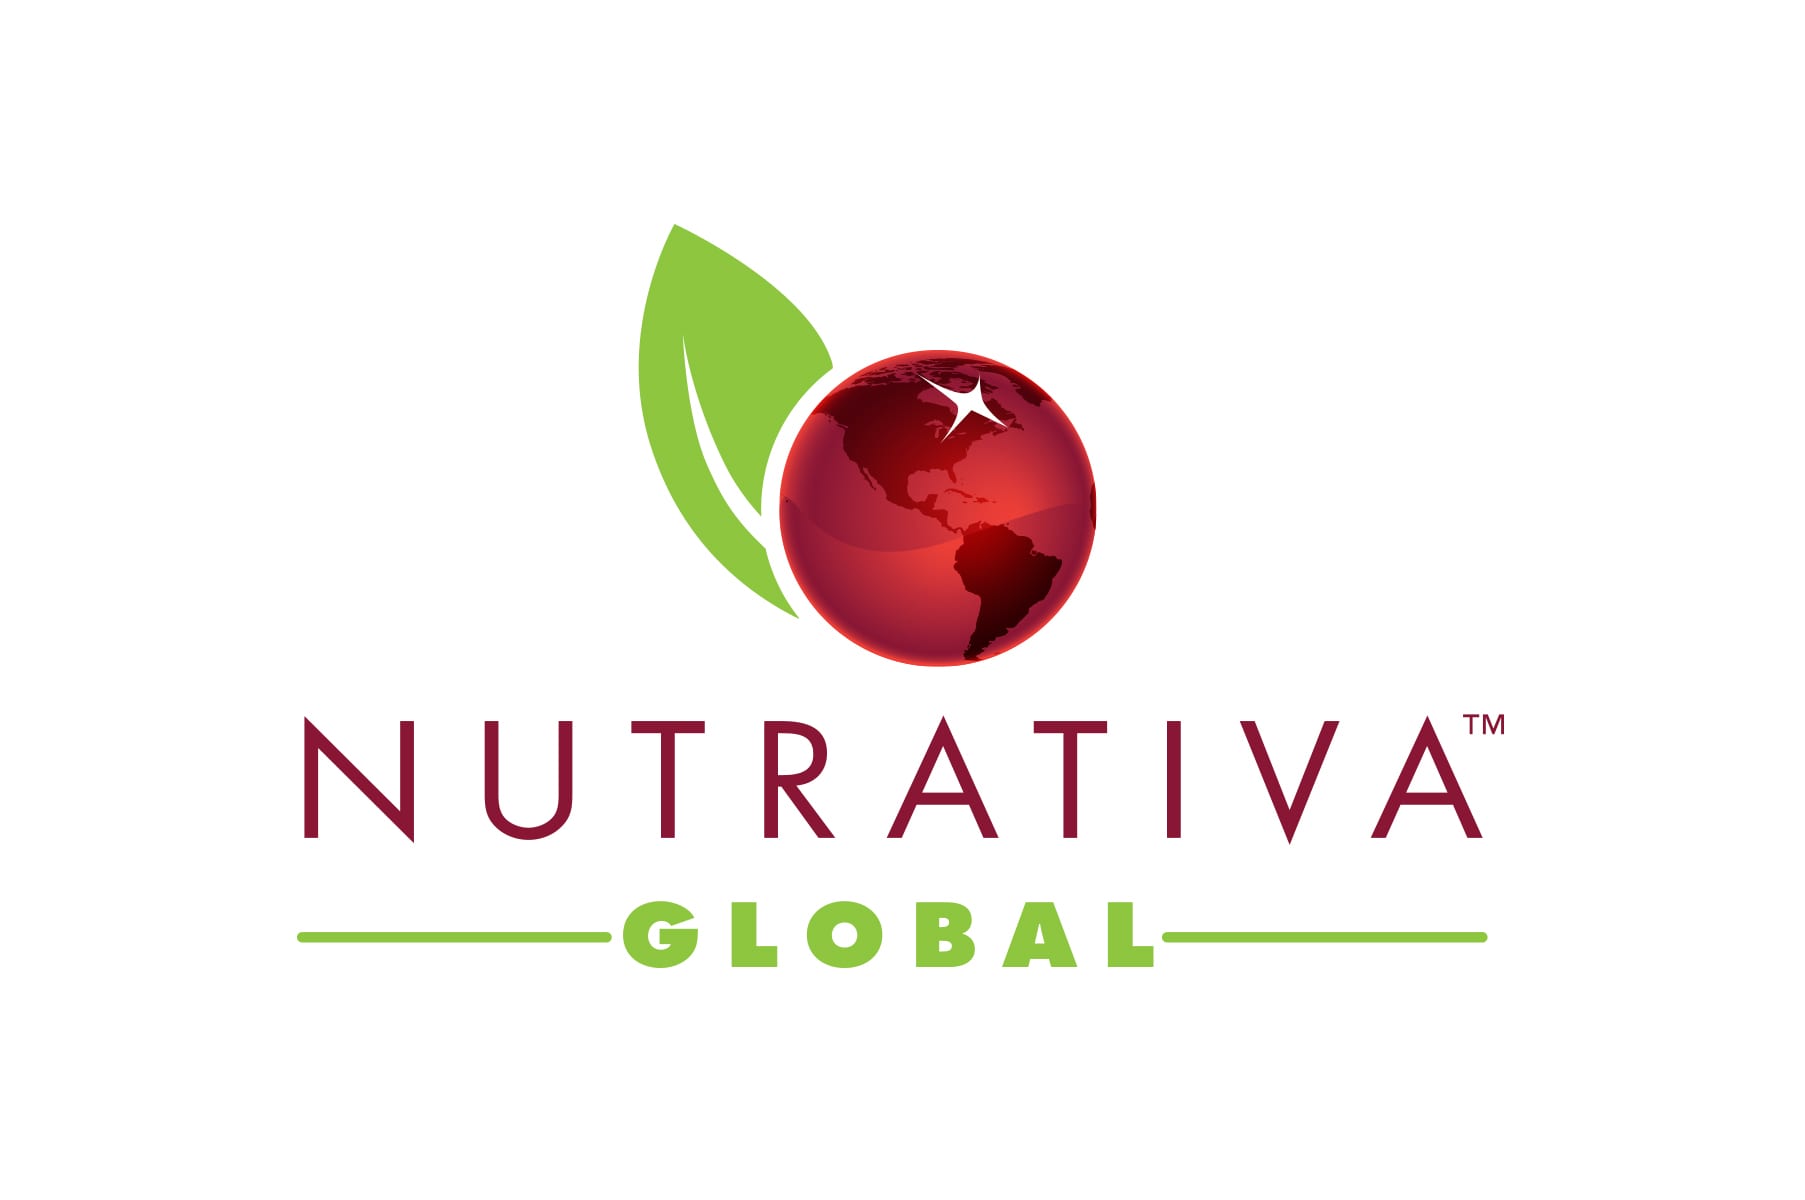 NUTRATIVA%28TM%29+GLOBAL%2C+NORTHERN+LIGHTS+FOOD+PROCESSING+AND+PALMER+HOLLAND+HEALTH+%26%23038%3B+NUTRITION+join+forces+to+promote+specialty+cranberry+ingredients